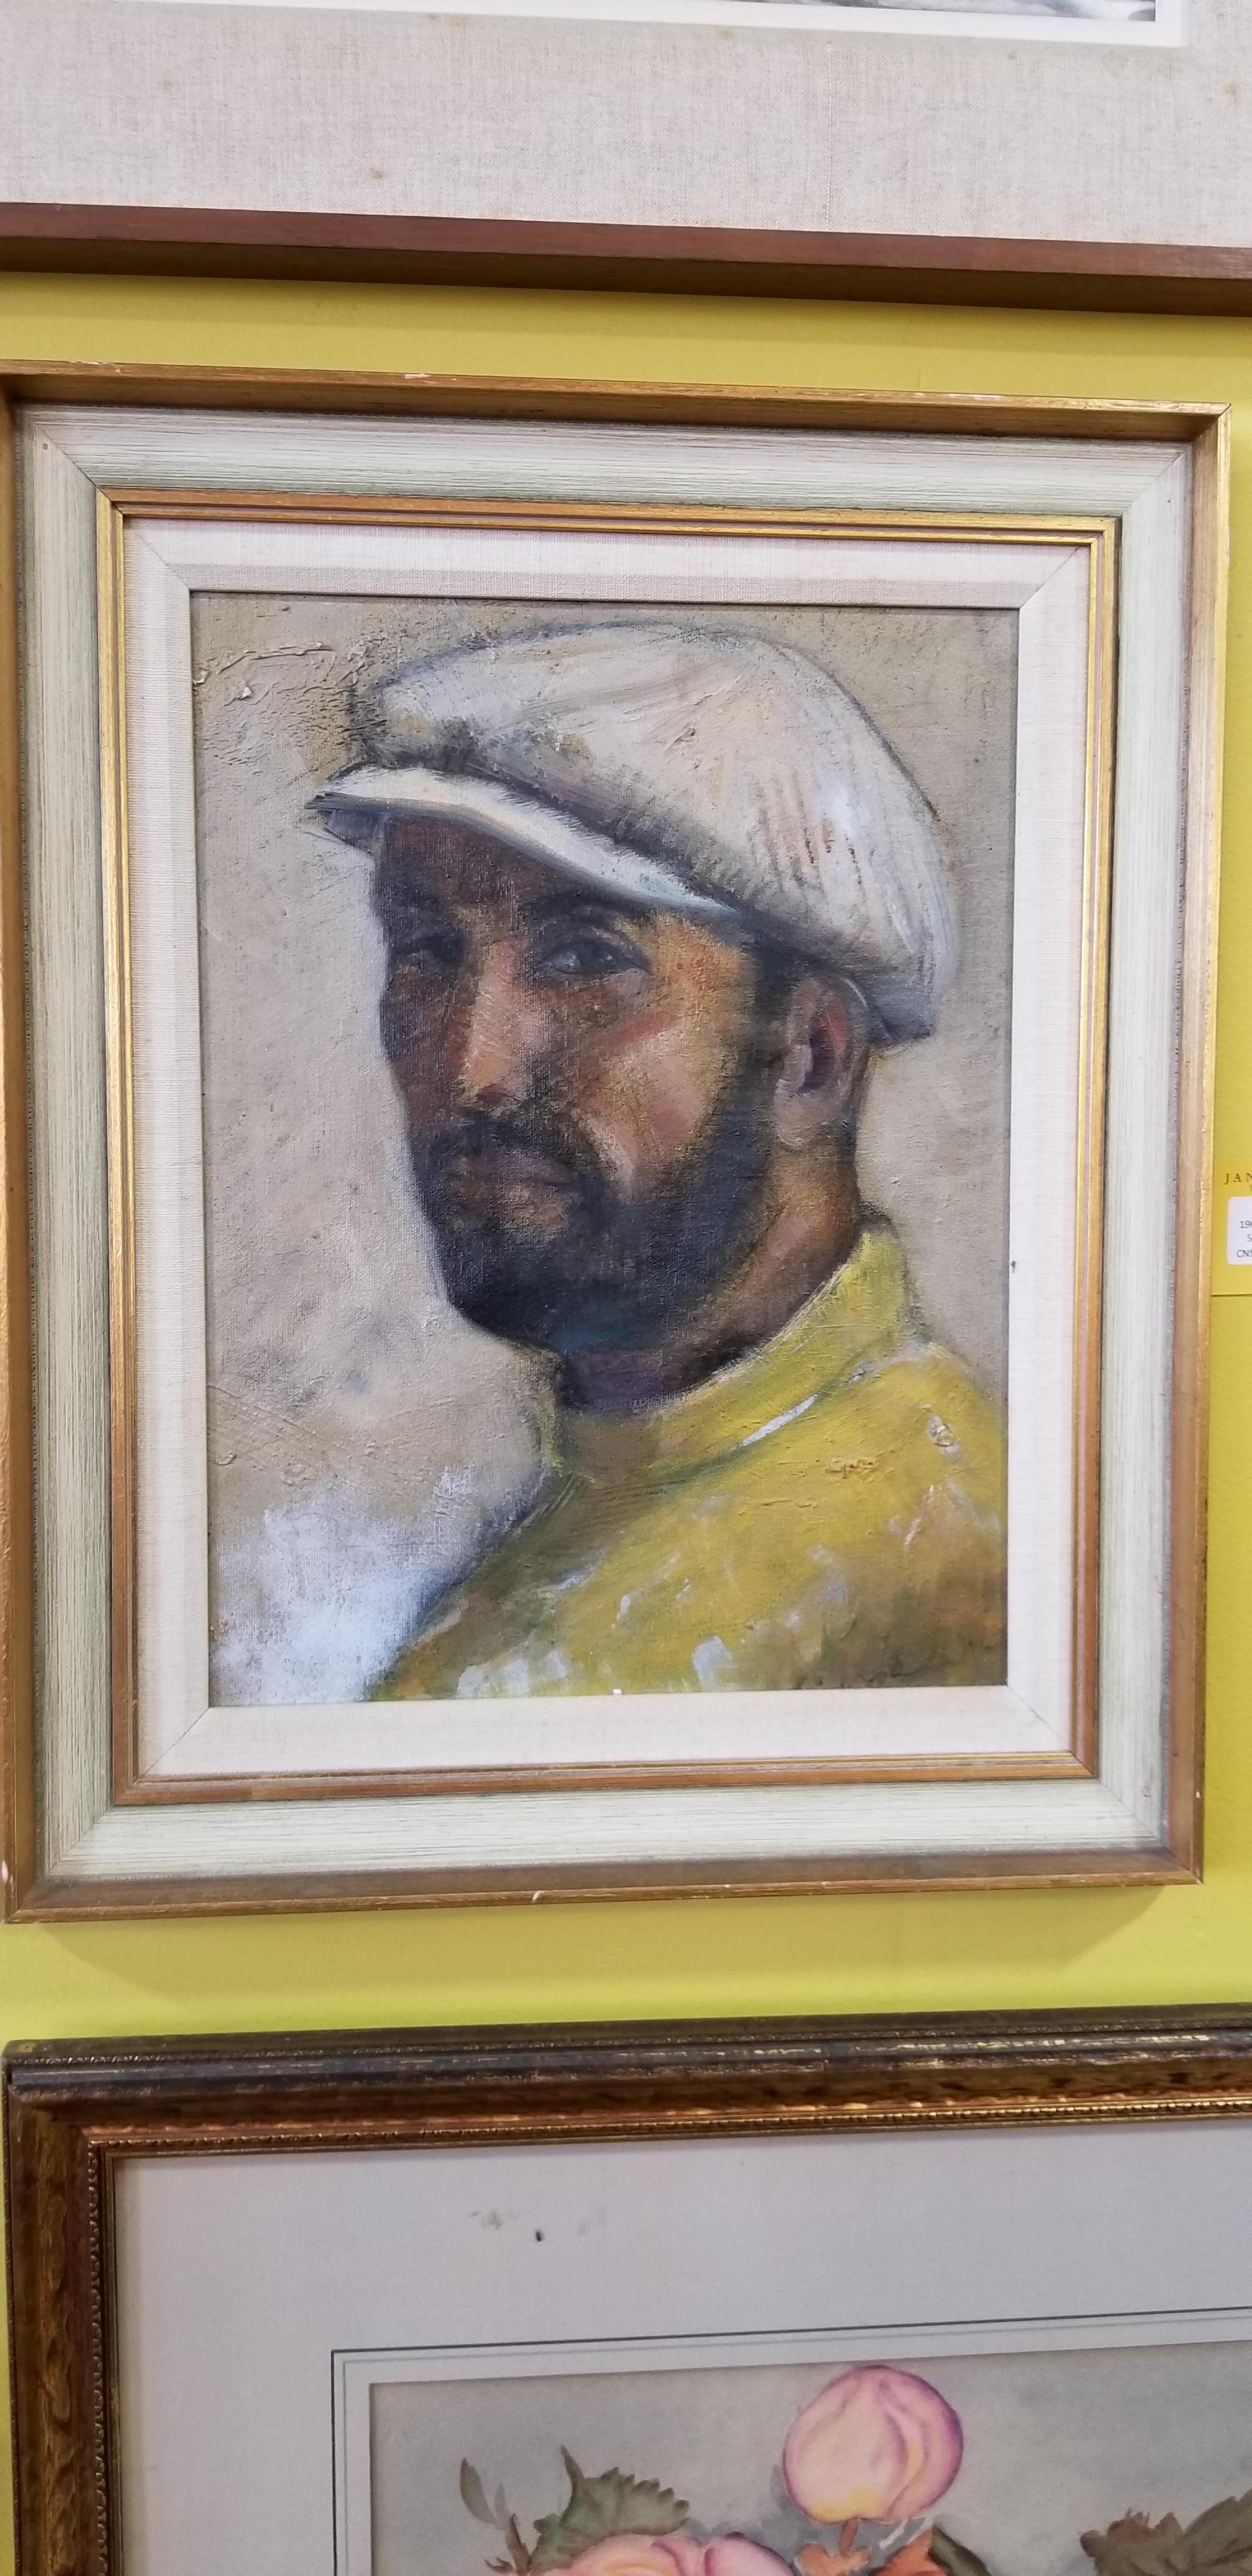 Original oil painting Self Portrait by Pascal Cucaro. Prolific in the North Beach area in San Francisco, California. Retains original frame. Painted on canvas laid down on wood panel.

Born in Youngstown, Ohio, in 1915, Pat, also known as Pascal,